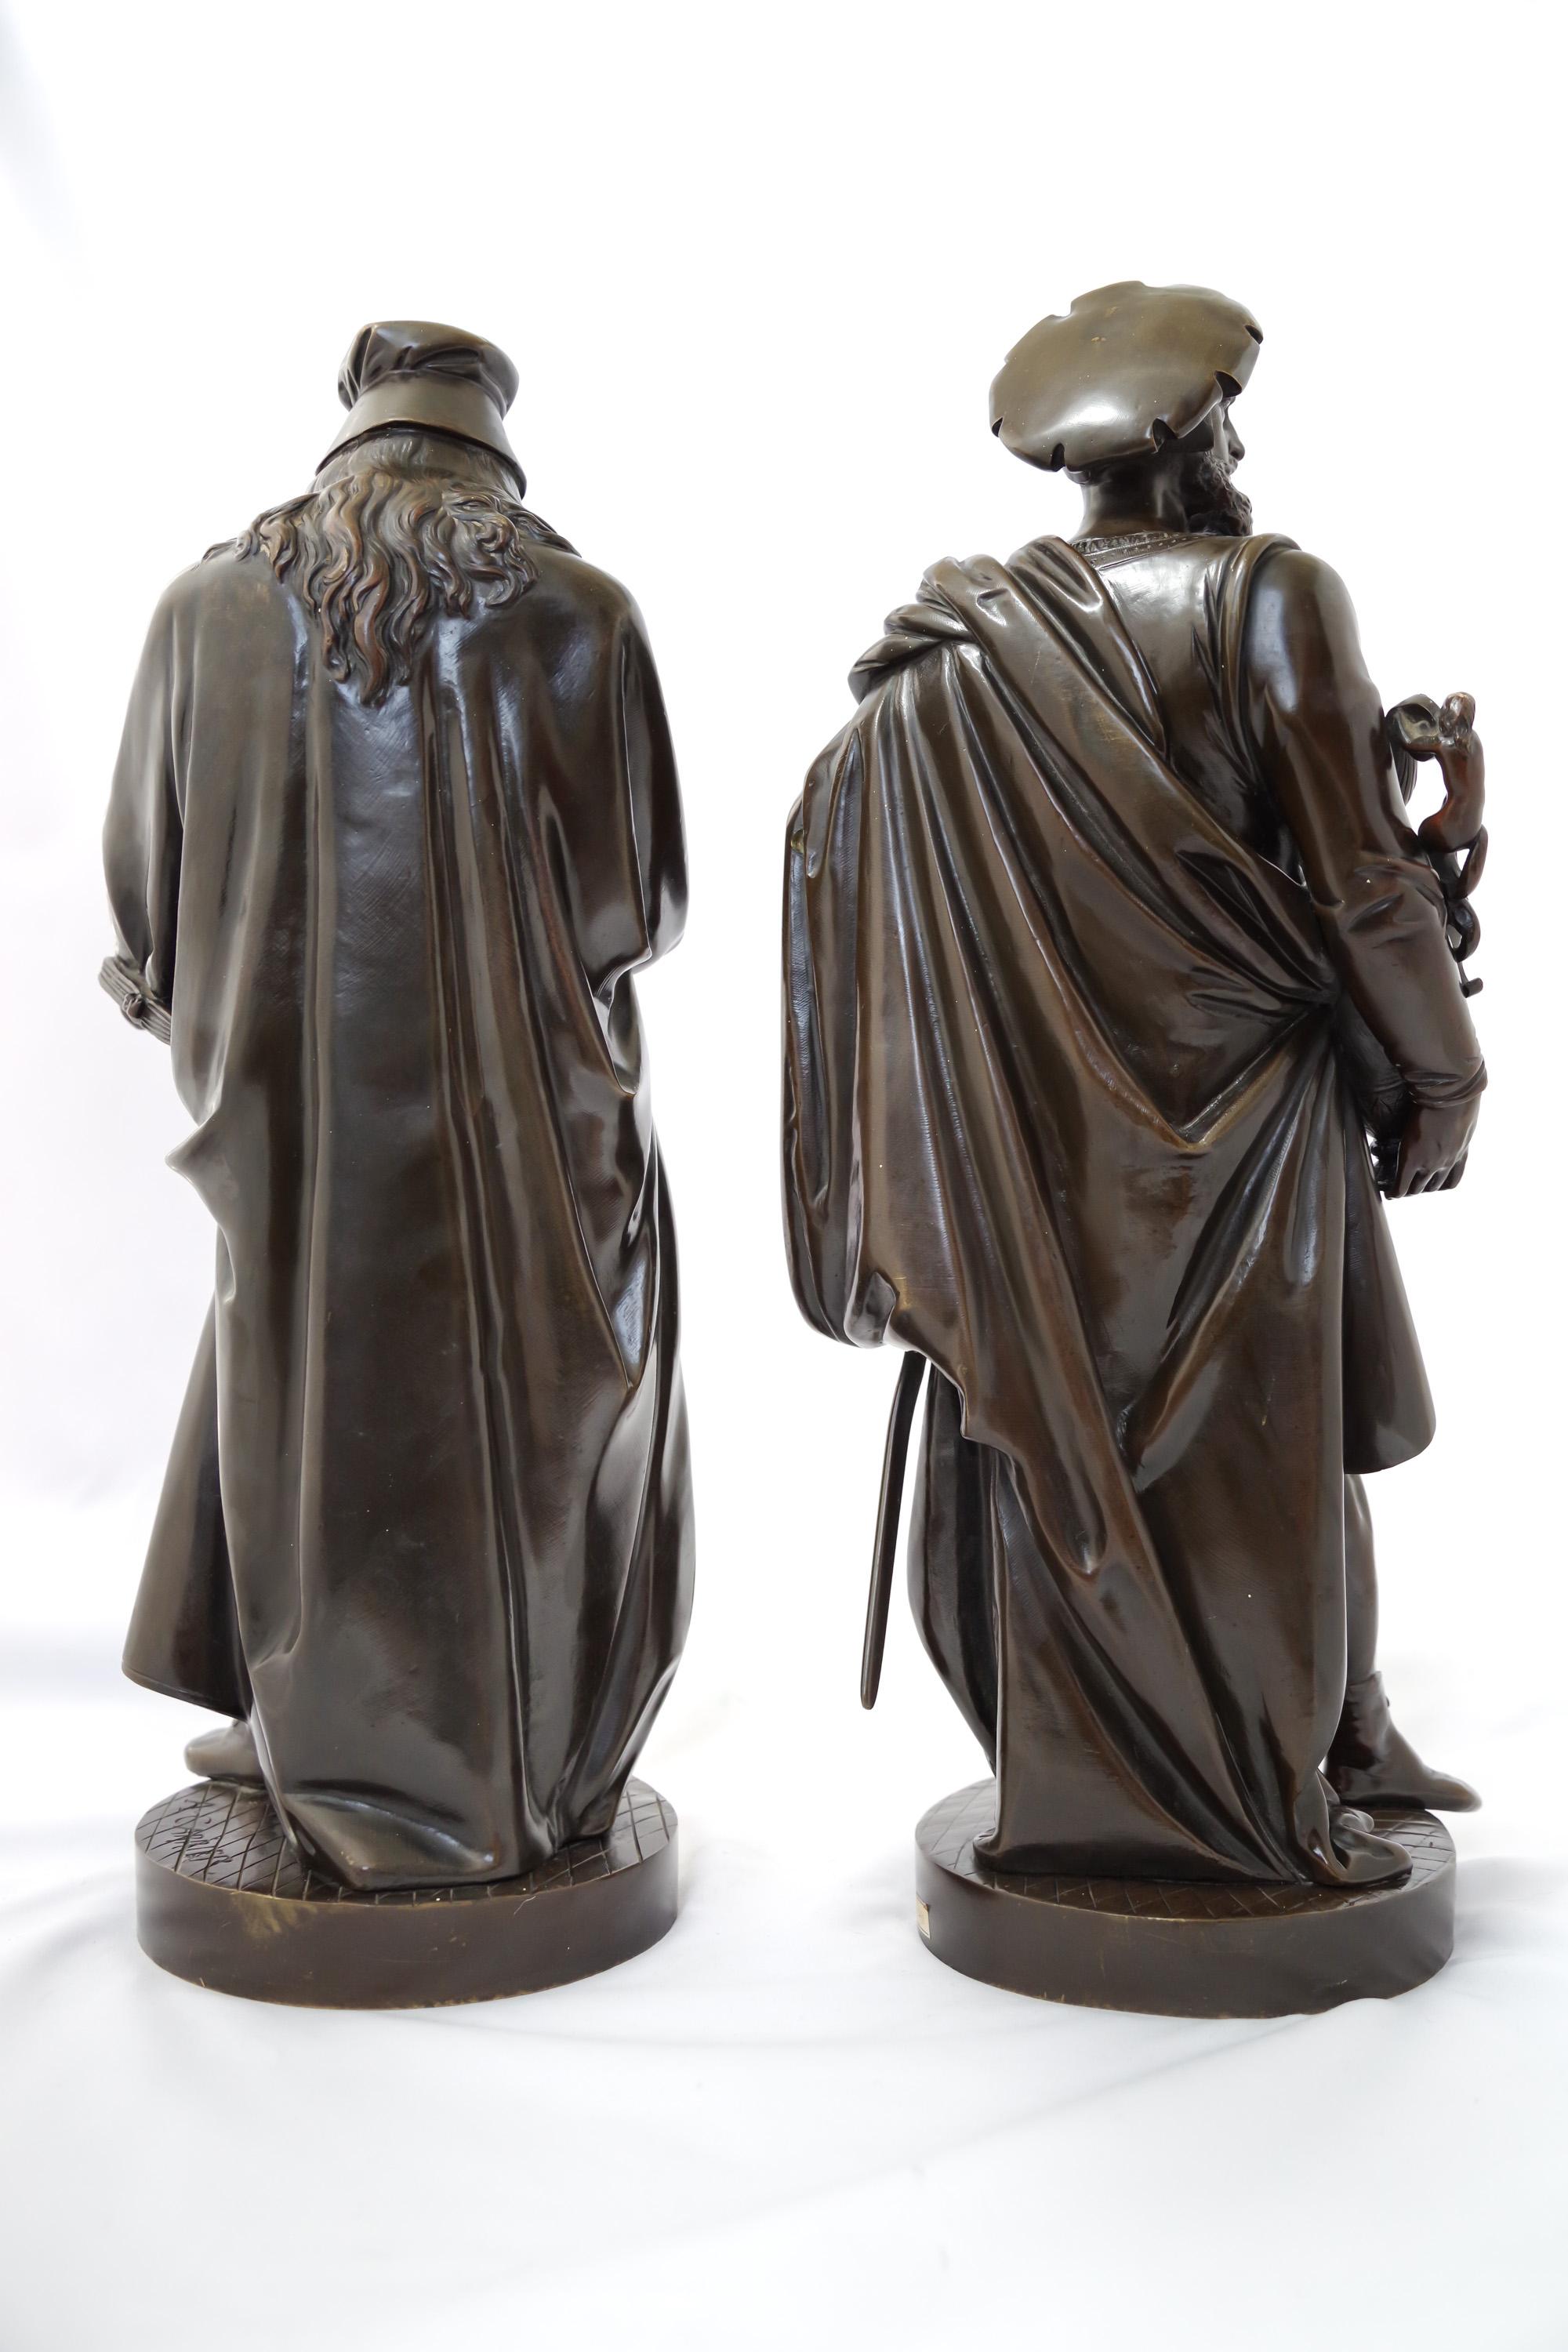 This couple of sculptures was made by Albert-Ernest Carrier-Belleuse, a French artist and one of the founding members of the Société Nationale des Beaux-Arts, who lived in the 19th century. This work in a dark-patinated bronze, represents Da Vinci